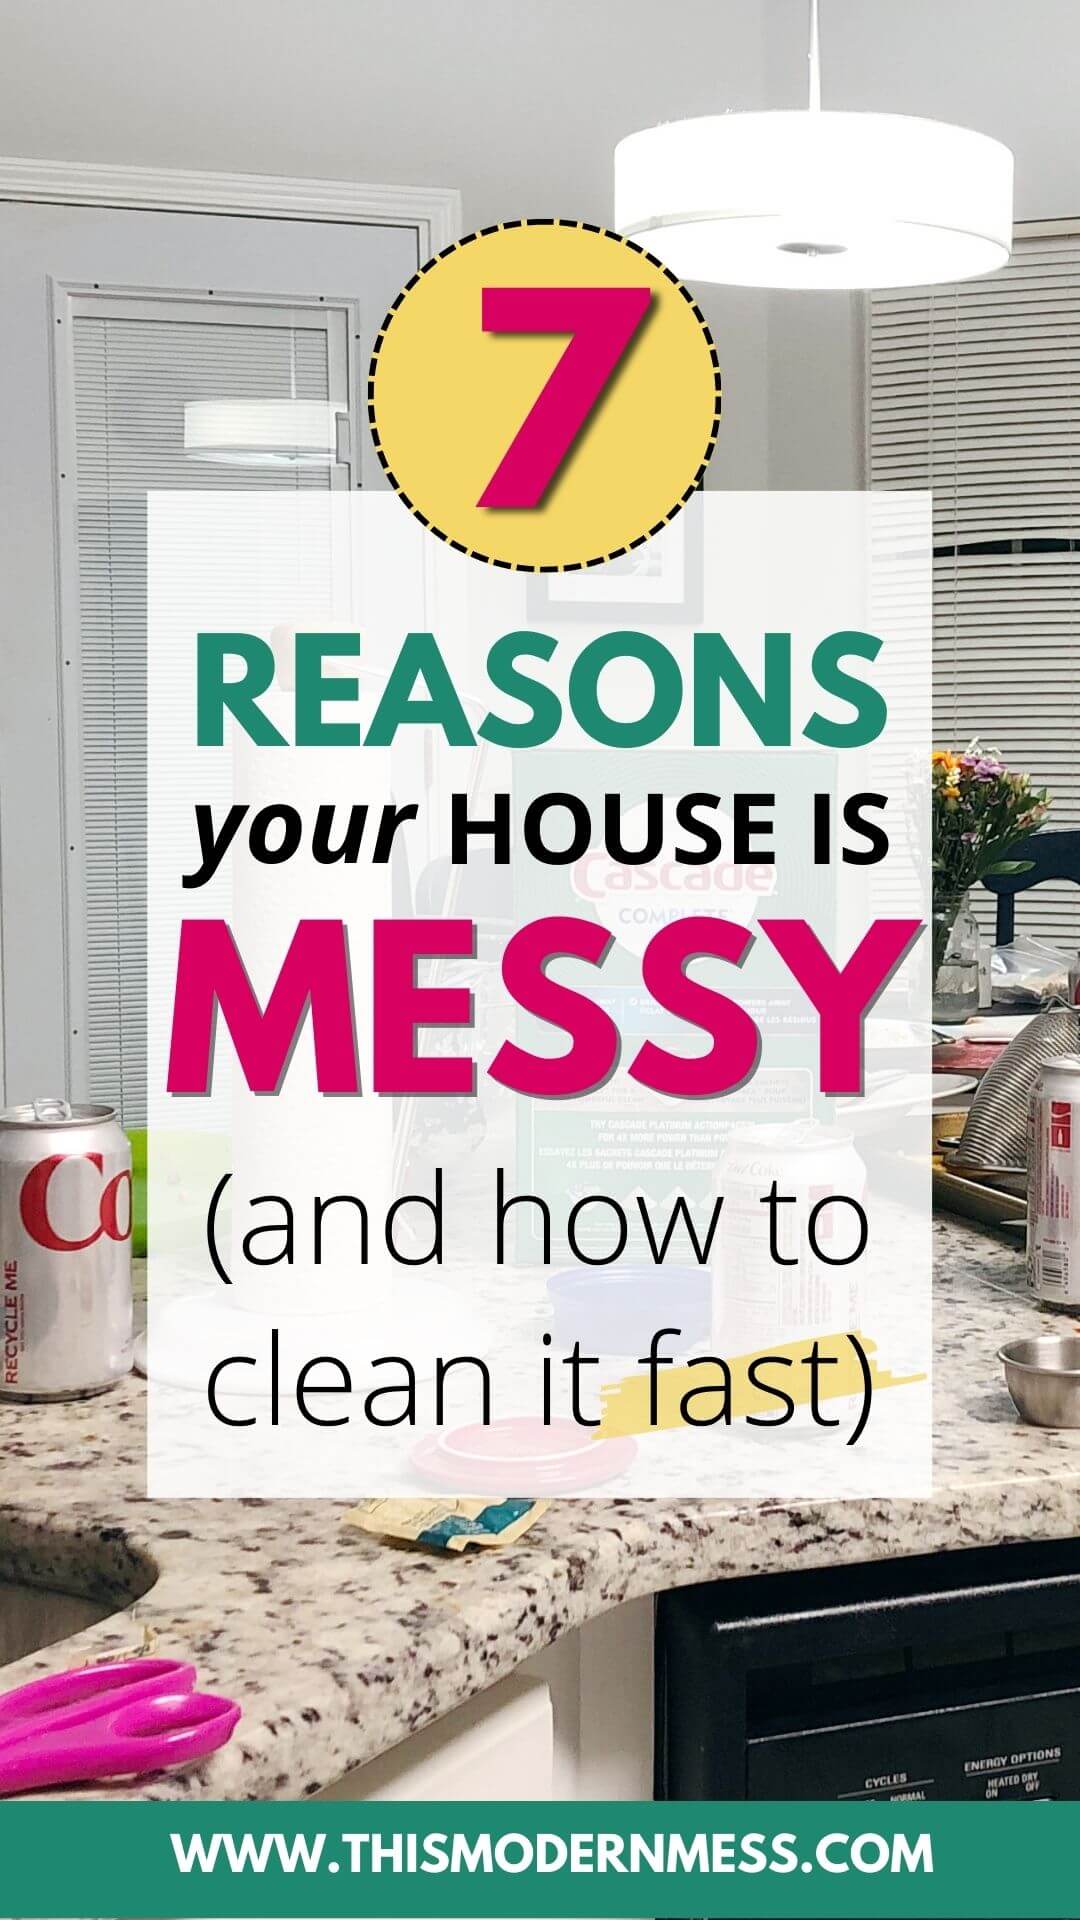 Picture of messy kitchen with the words "7 reasons your house is messy (and how to clean it fast)"